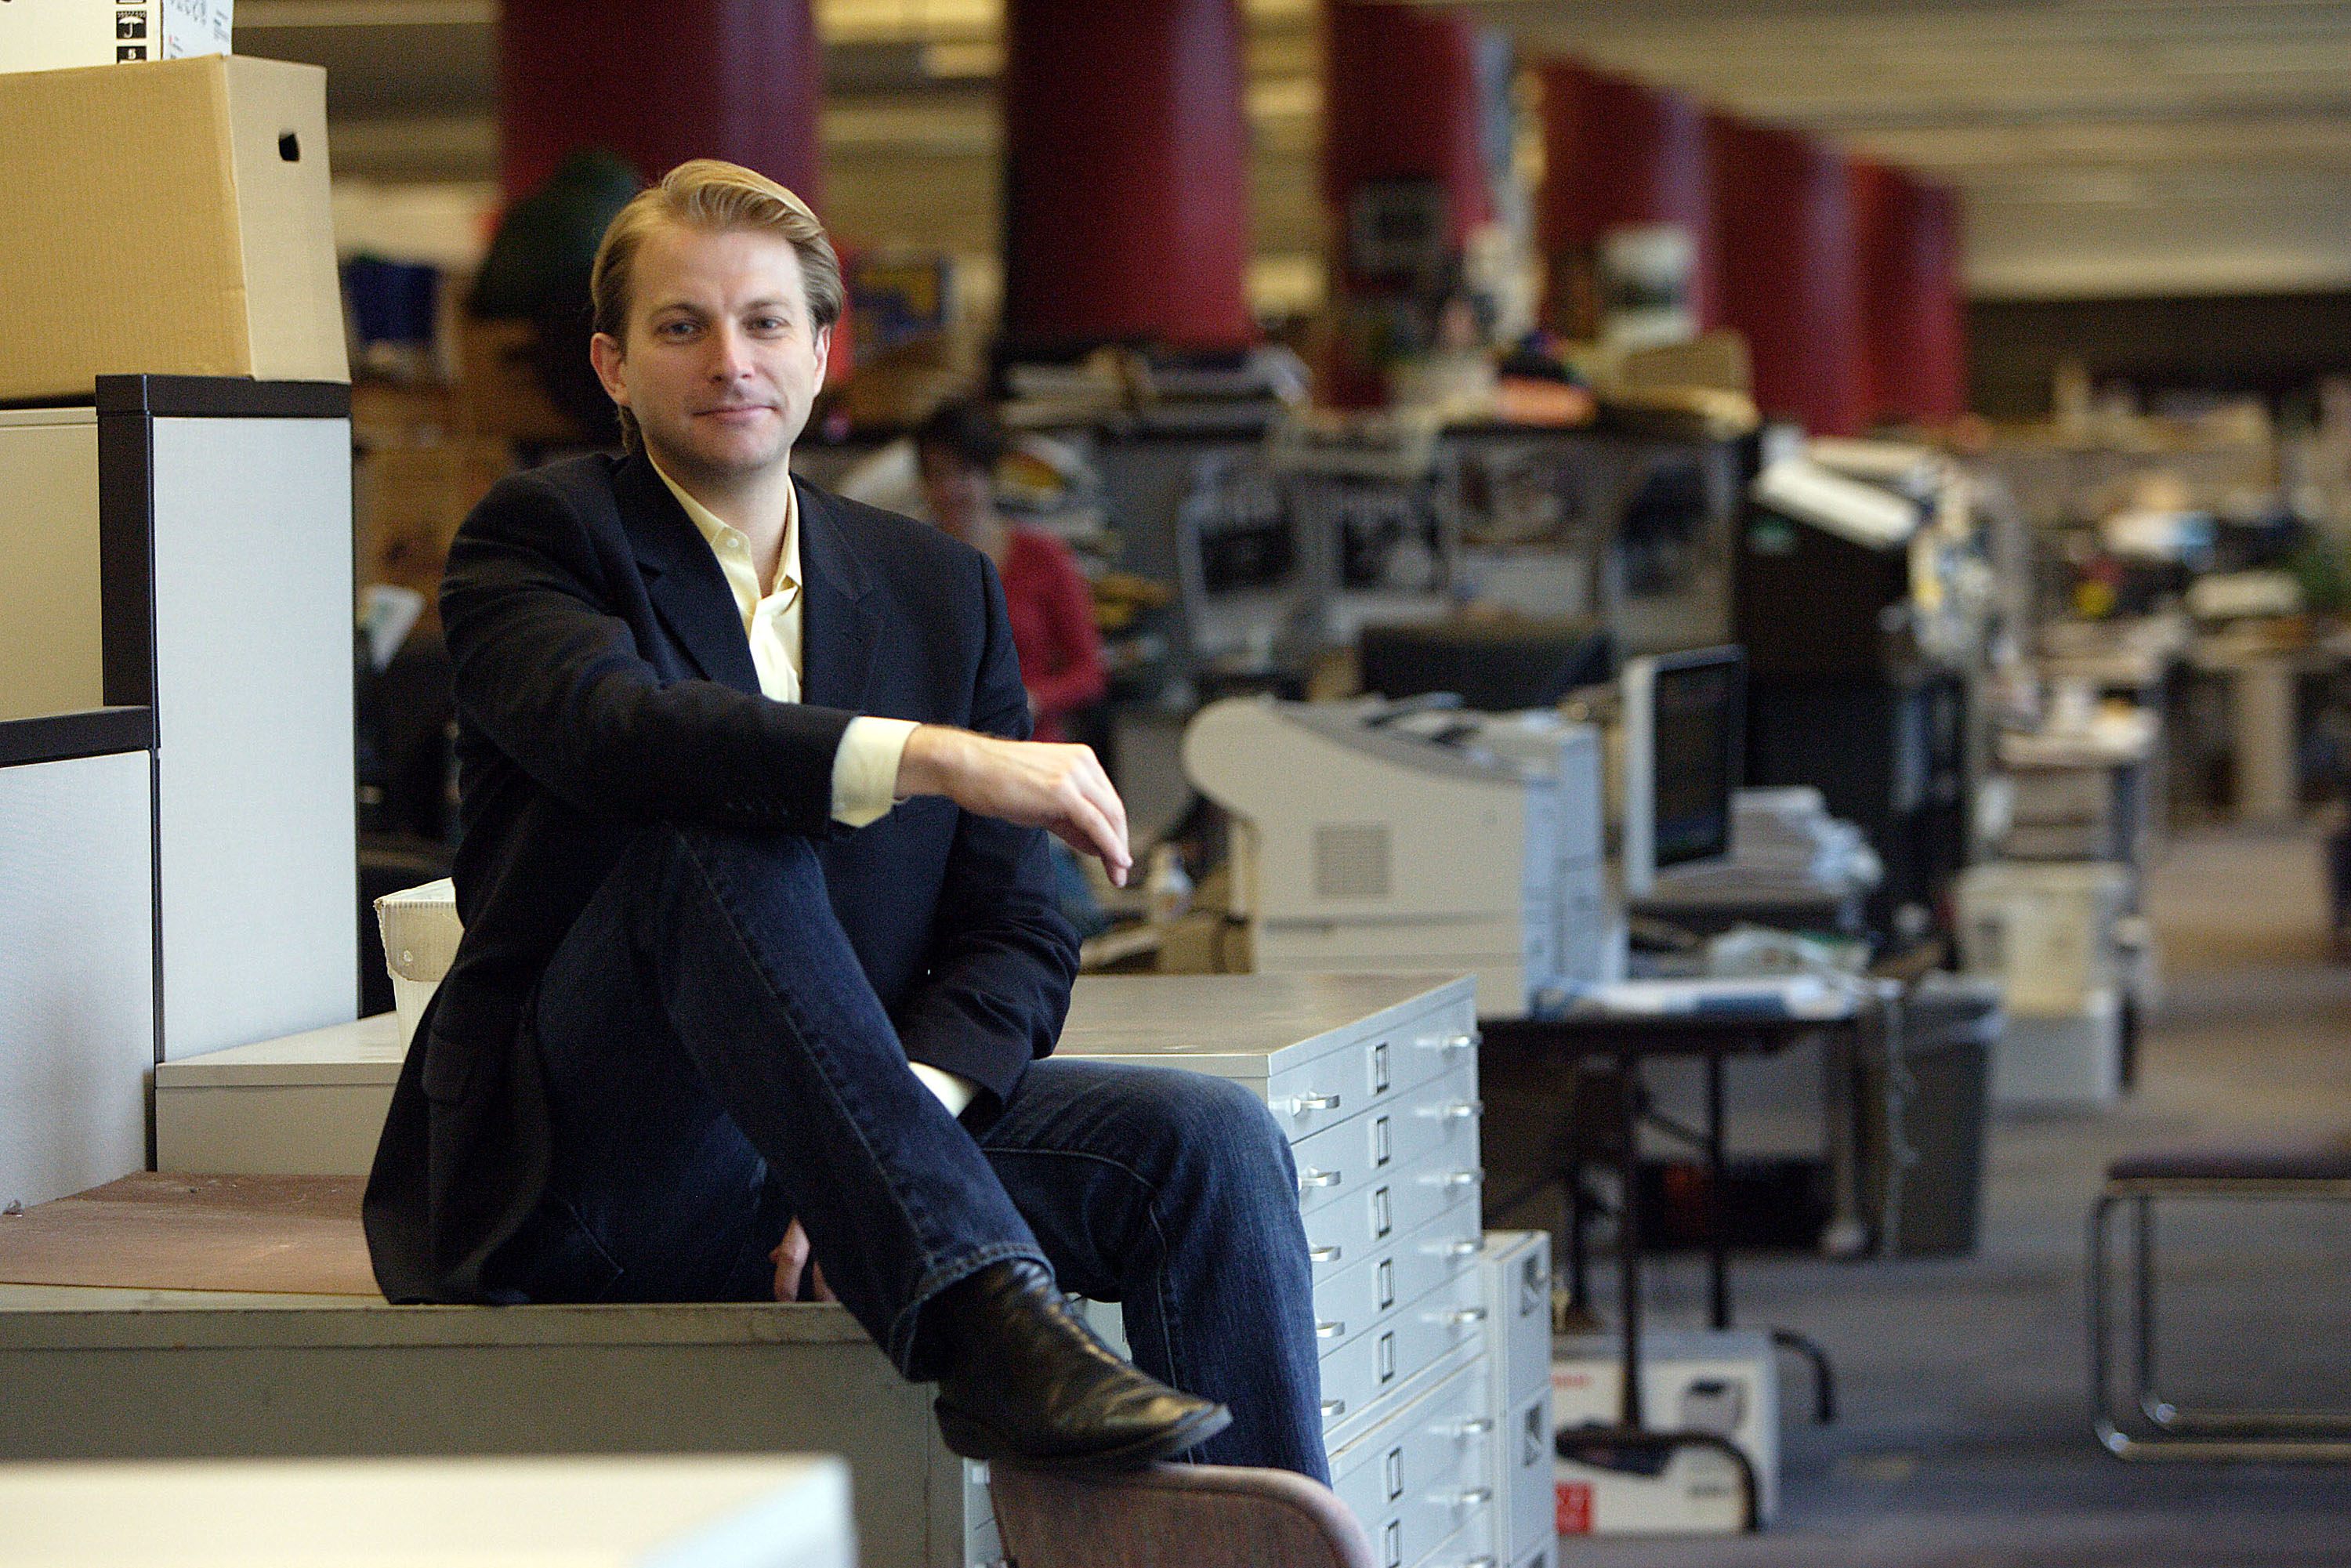 New York Daily News gossip columnist Ben Widdicombe photographed at his desk at the New York Daily News on March 29, 2005 in New York City. (Scott Gries—Getty Images)